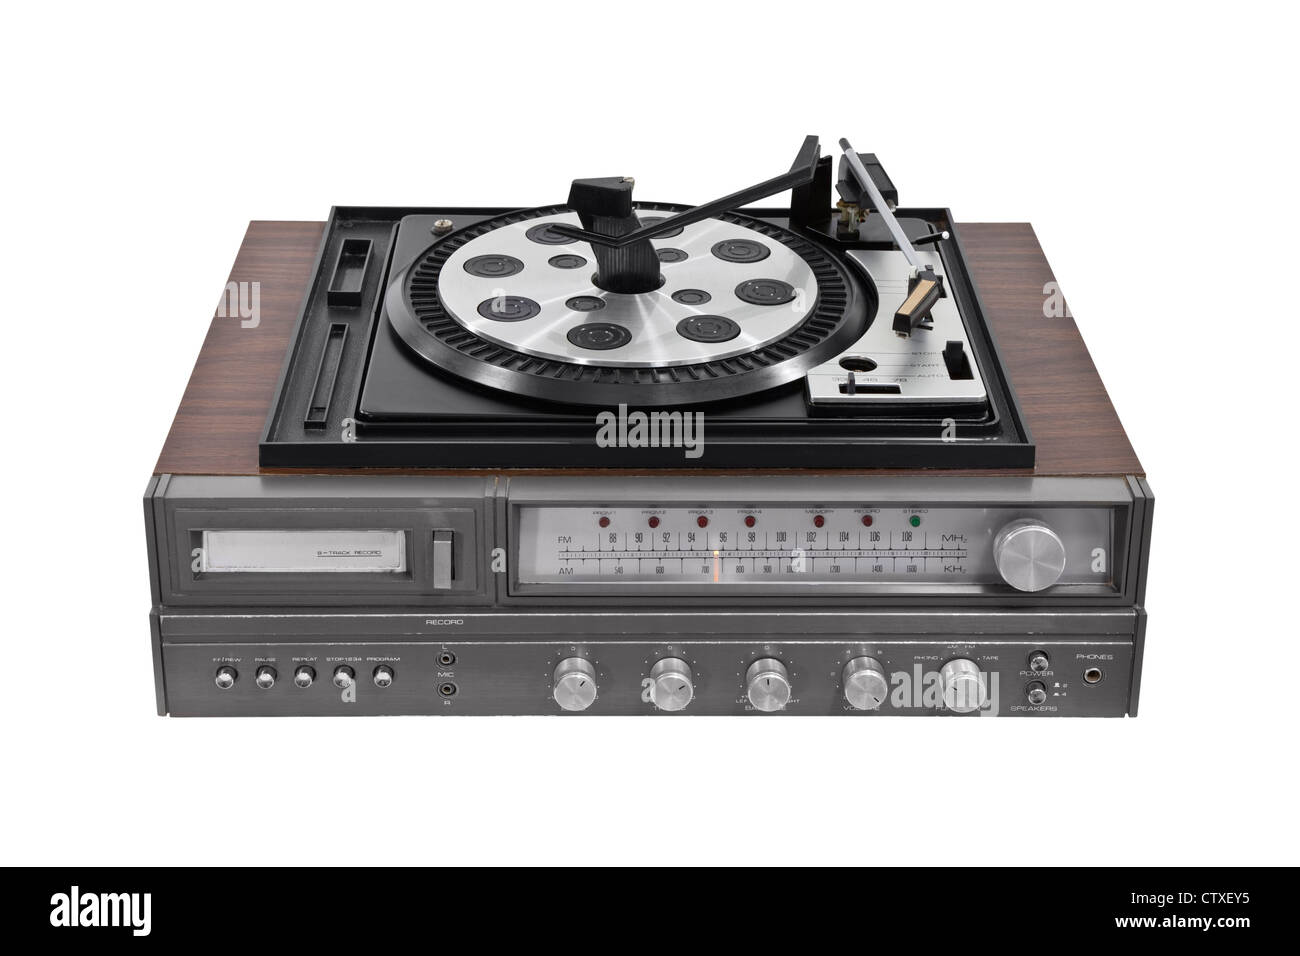 Vintage turntable stereo receiver isolated with clipping path. Stock Photo